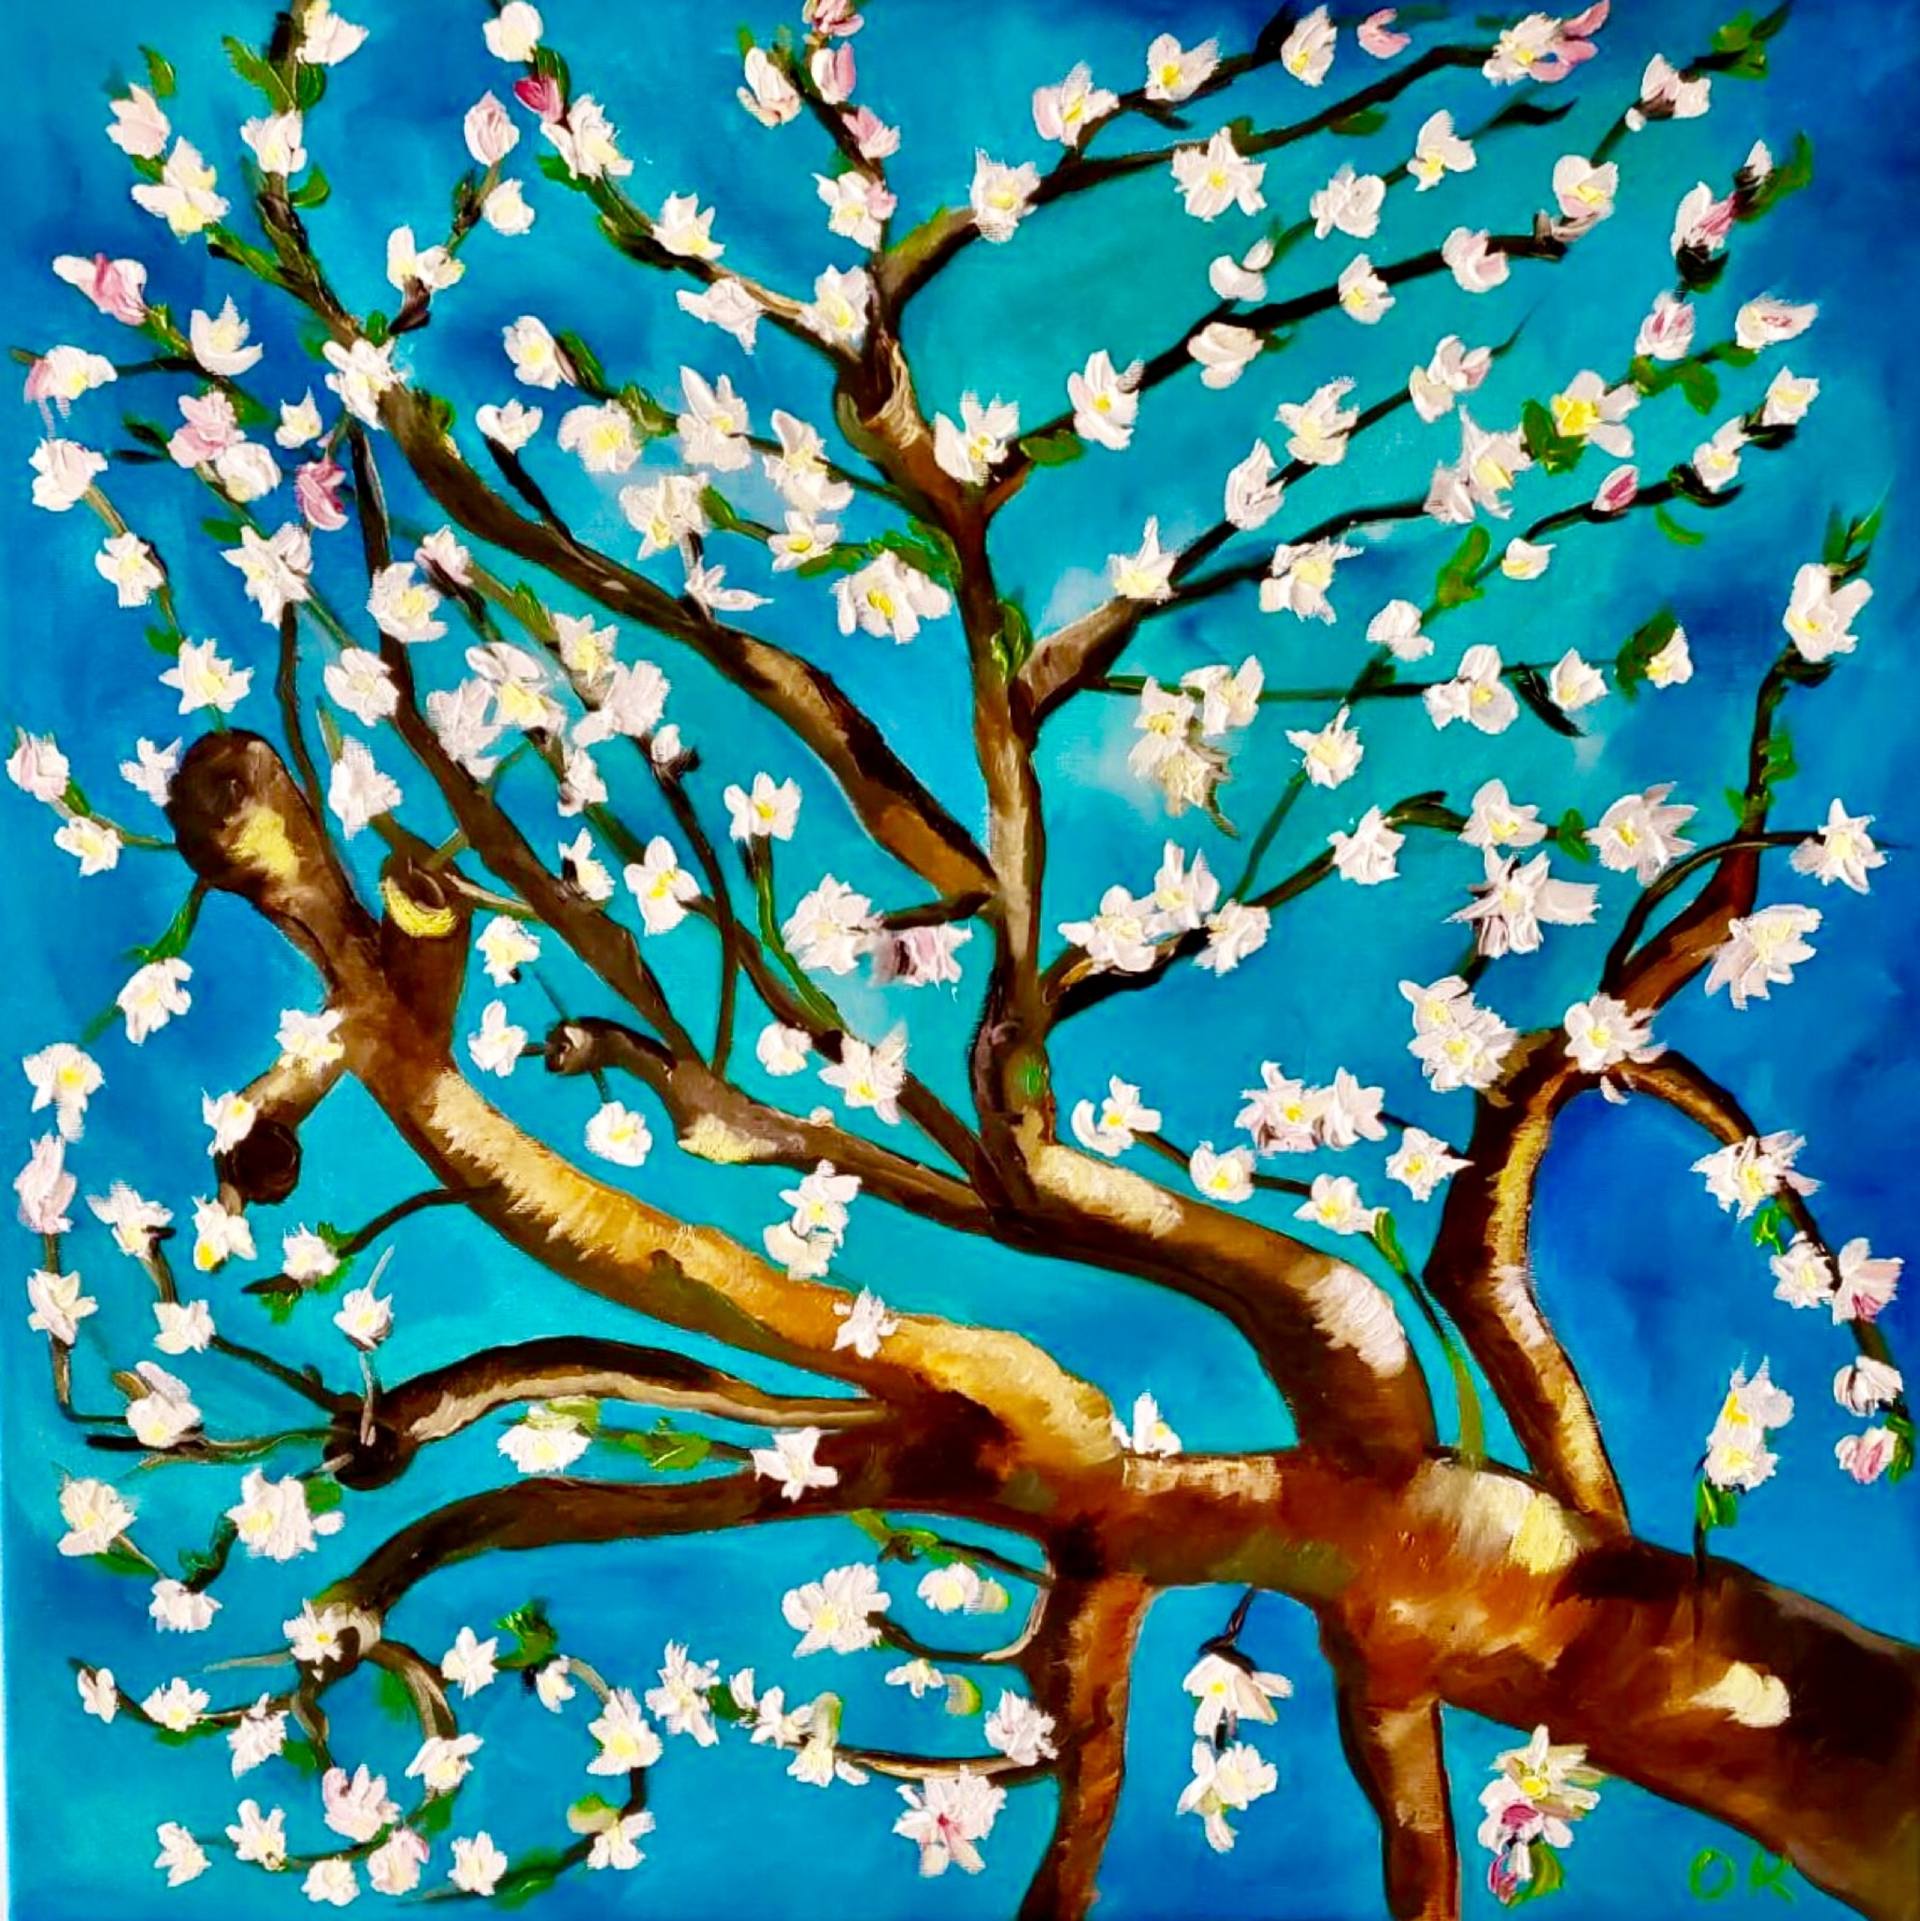 ALMOND BLOSSOM ON TURQUOISE INSPIRED BY VINCENT VAN GOGH Painting by Olga  Koval | Saatchi Art